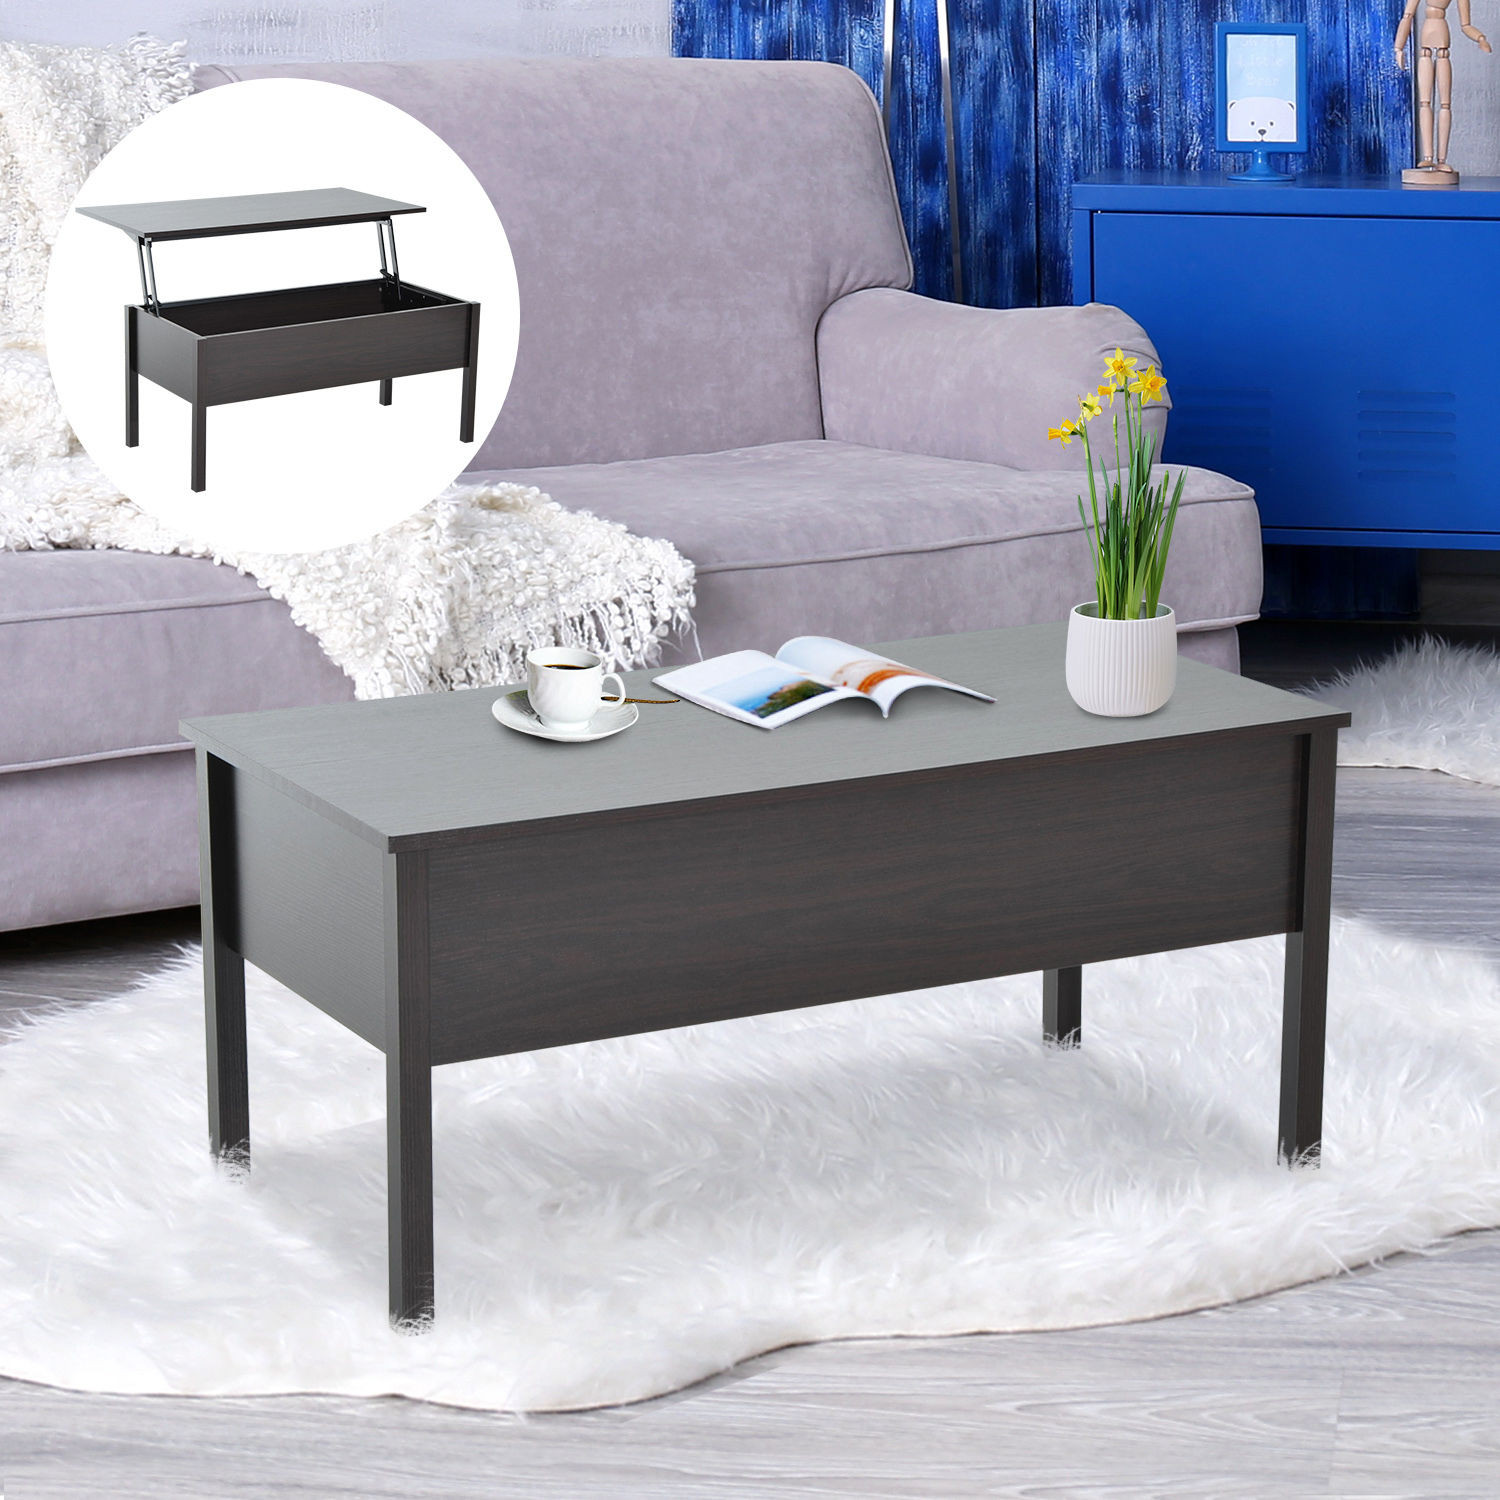 Living Room Table With Storage
 Modern Coffee End Table Lift Top with Storage Space Living